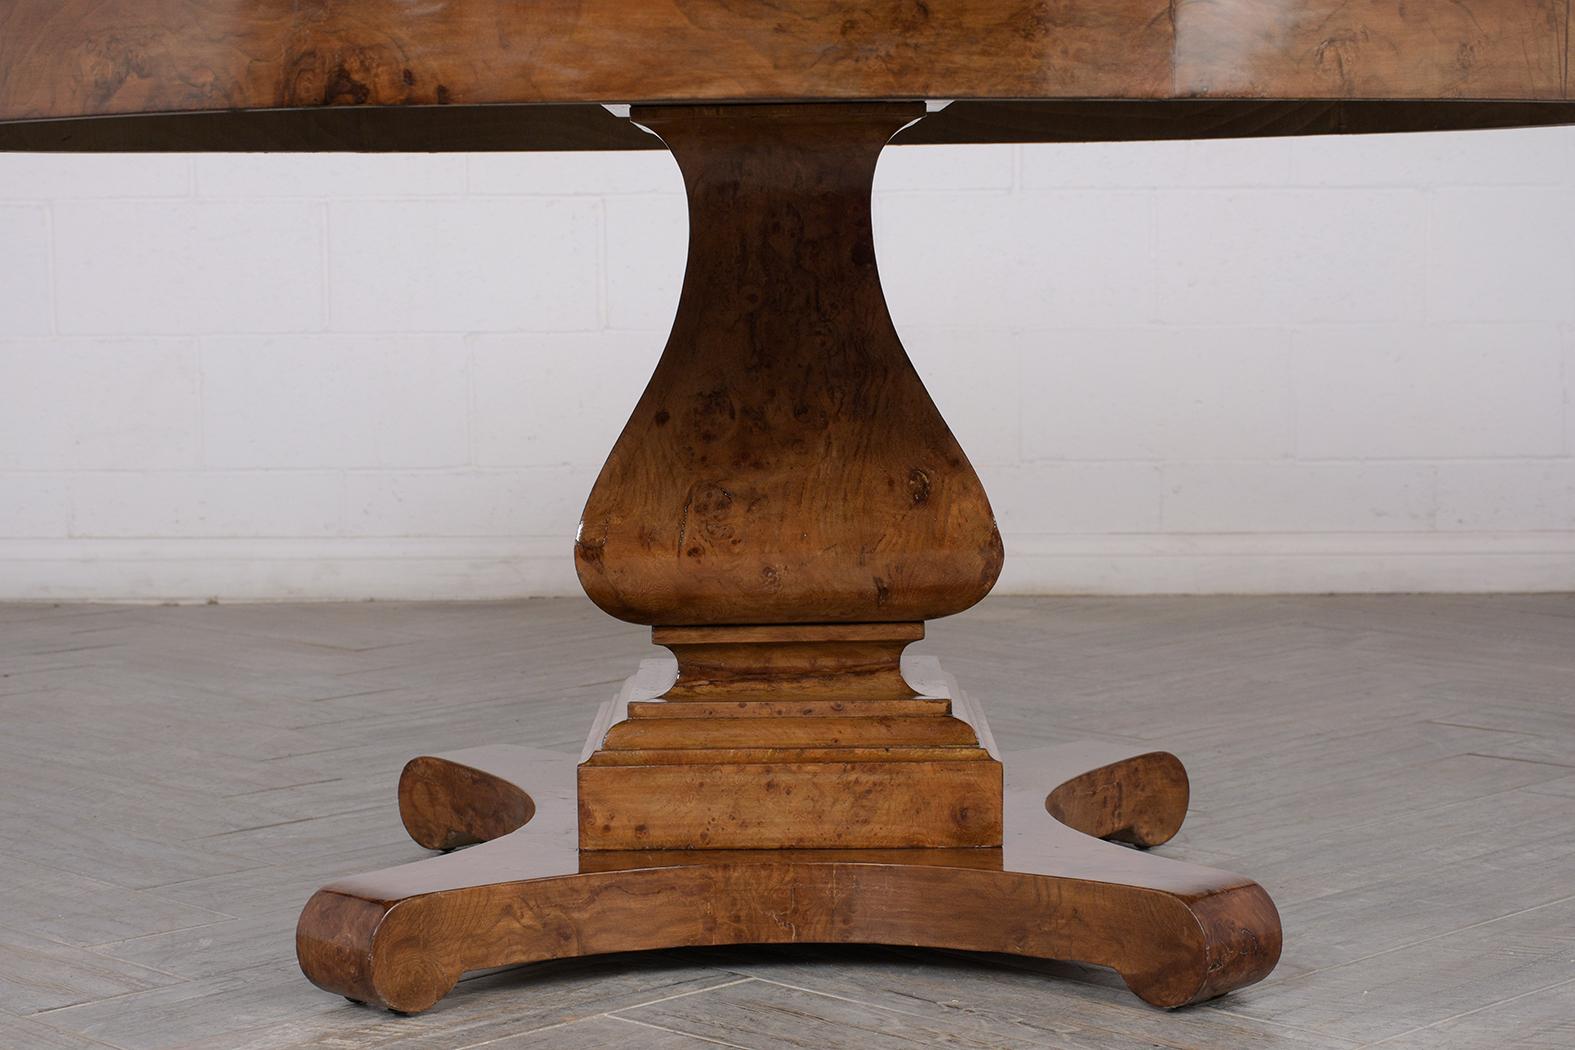 This 1900’s Empire-Style Burl Center Table has been completely restored and made of solid wood covered in a burl exotic veneers. This table features a beautiful inlay design and rests on a large carved pedestal base with scroll design feet. This